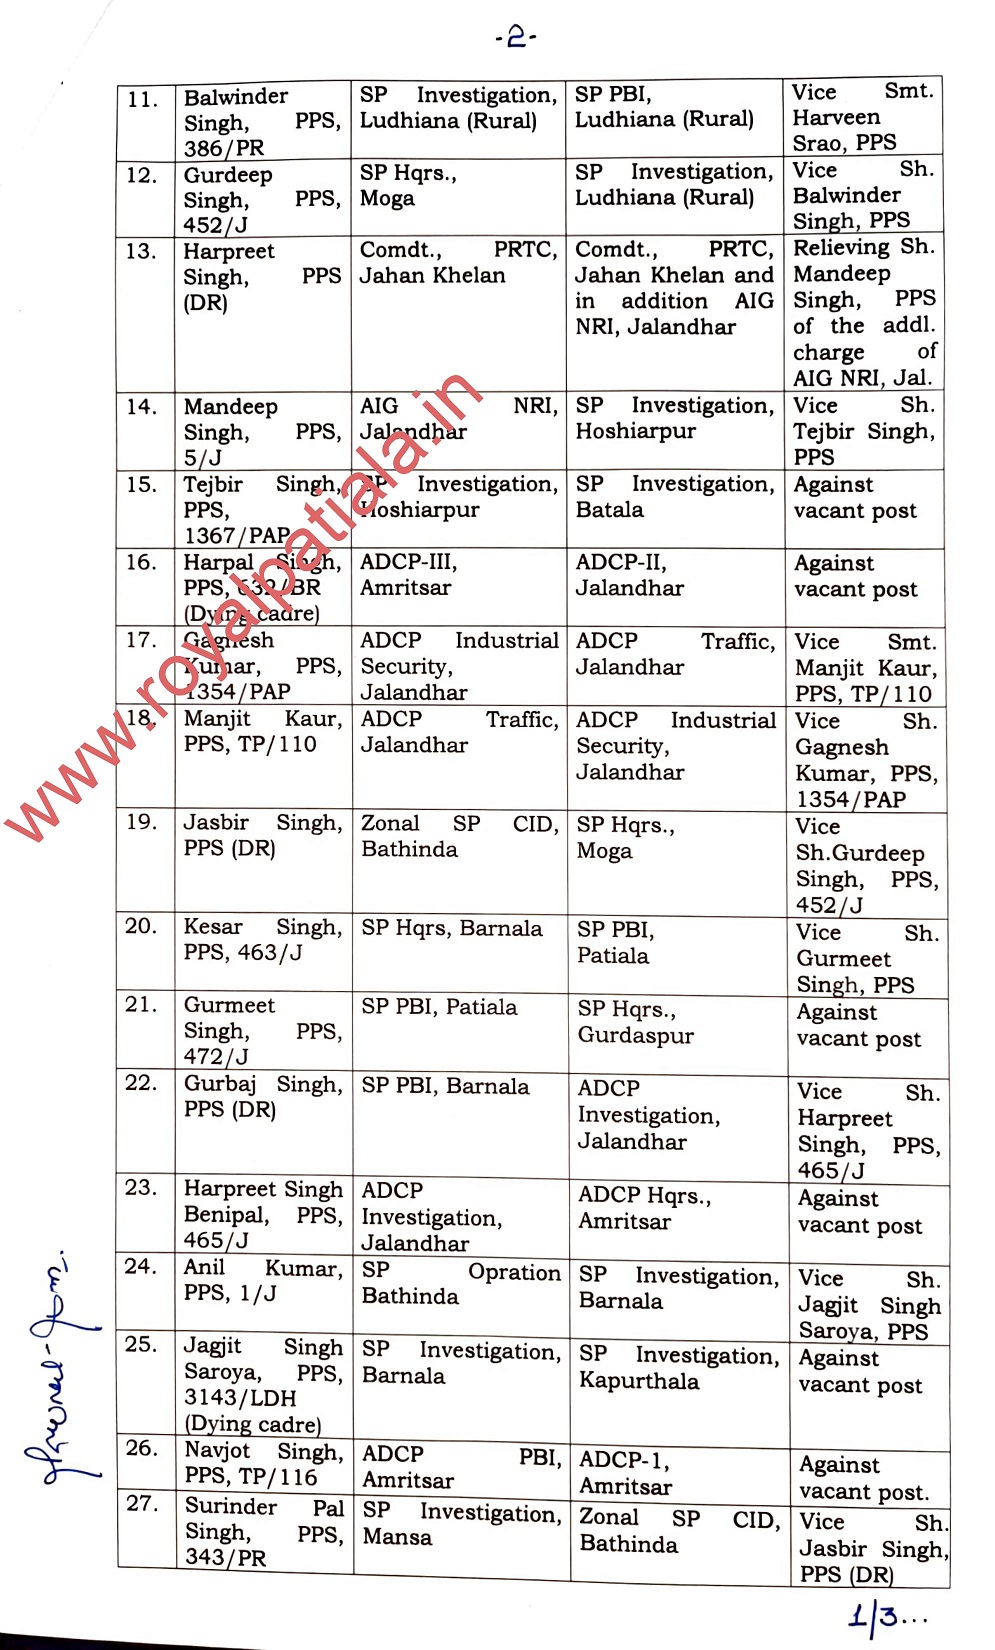 35 IPS-PPS transferred in Punjab